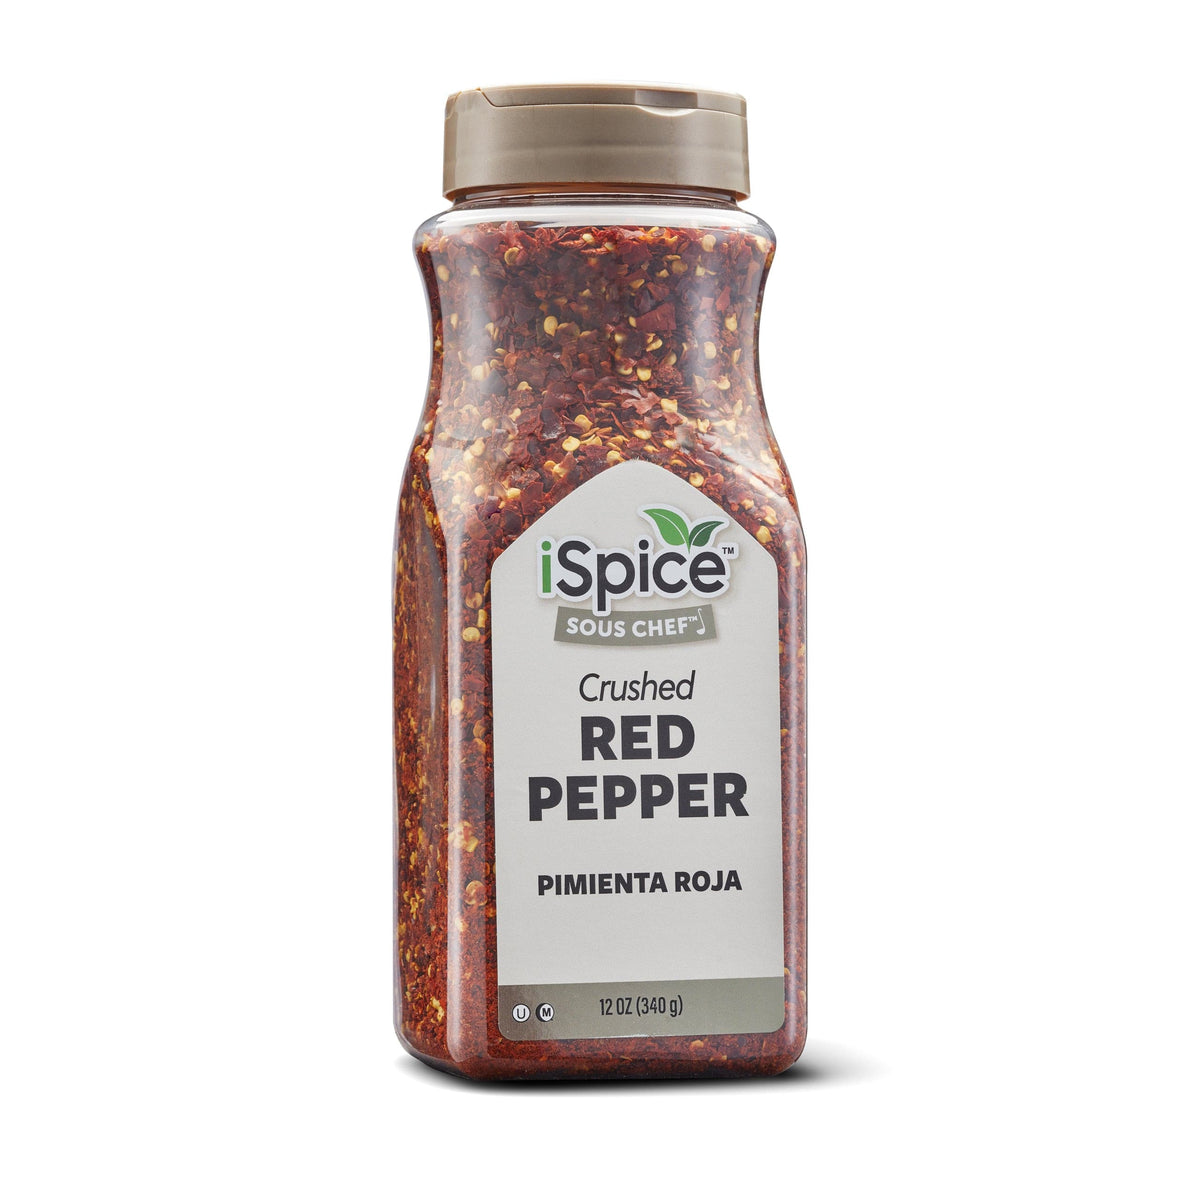 Add a kick to your dishes with our crushed red pepper flakes! Our 100% natural flakes give you the perfect balance of flavor and heat that will elevate any dish.